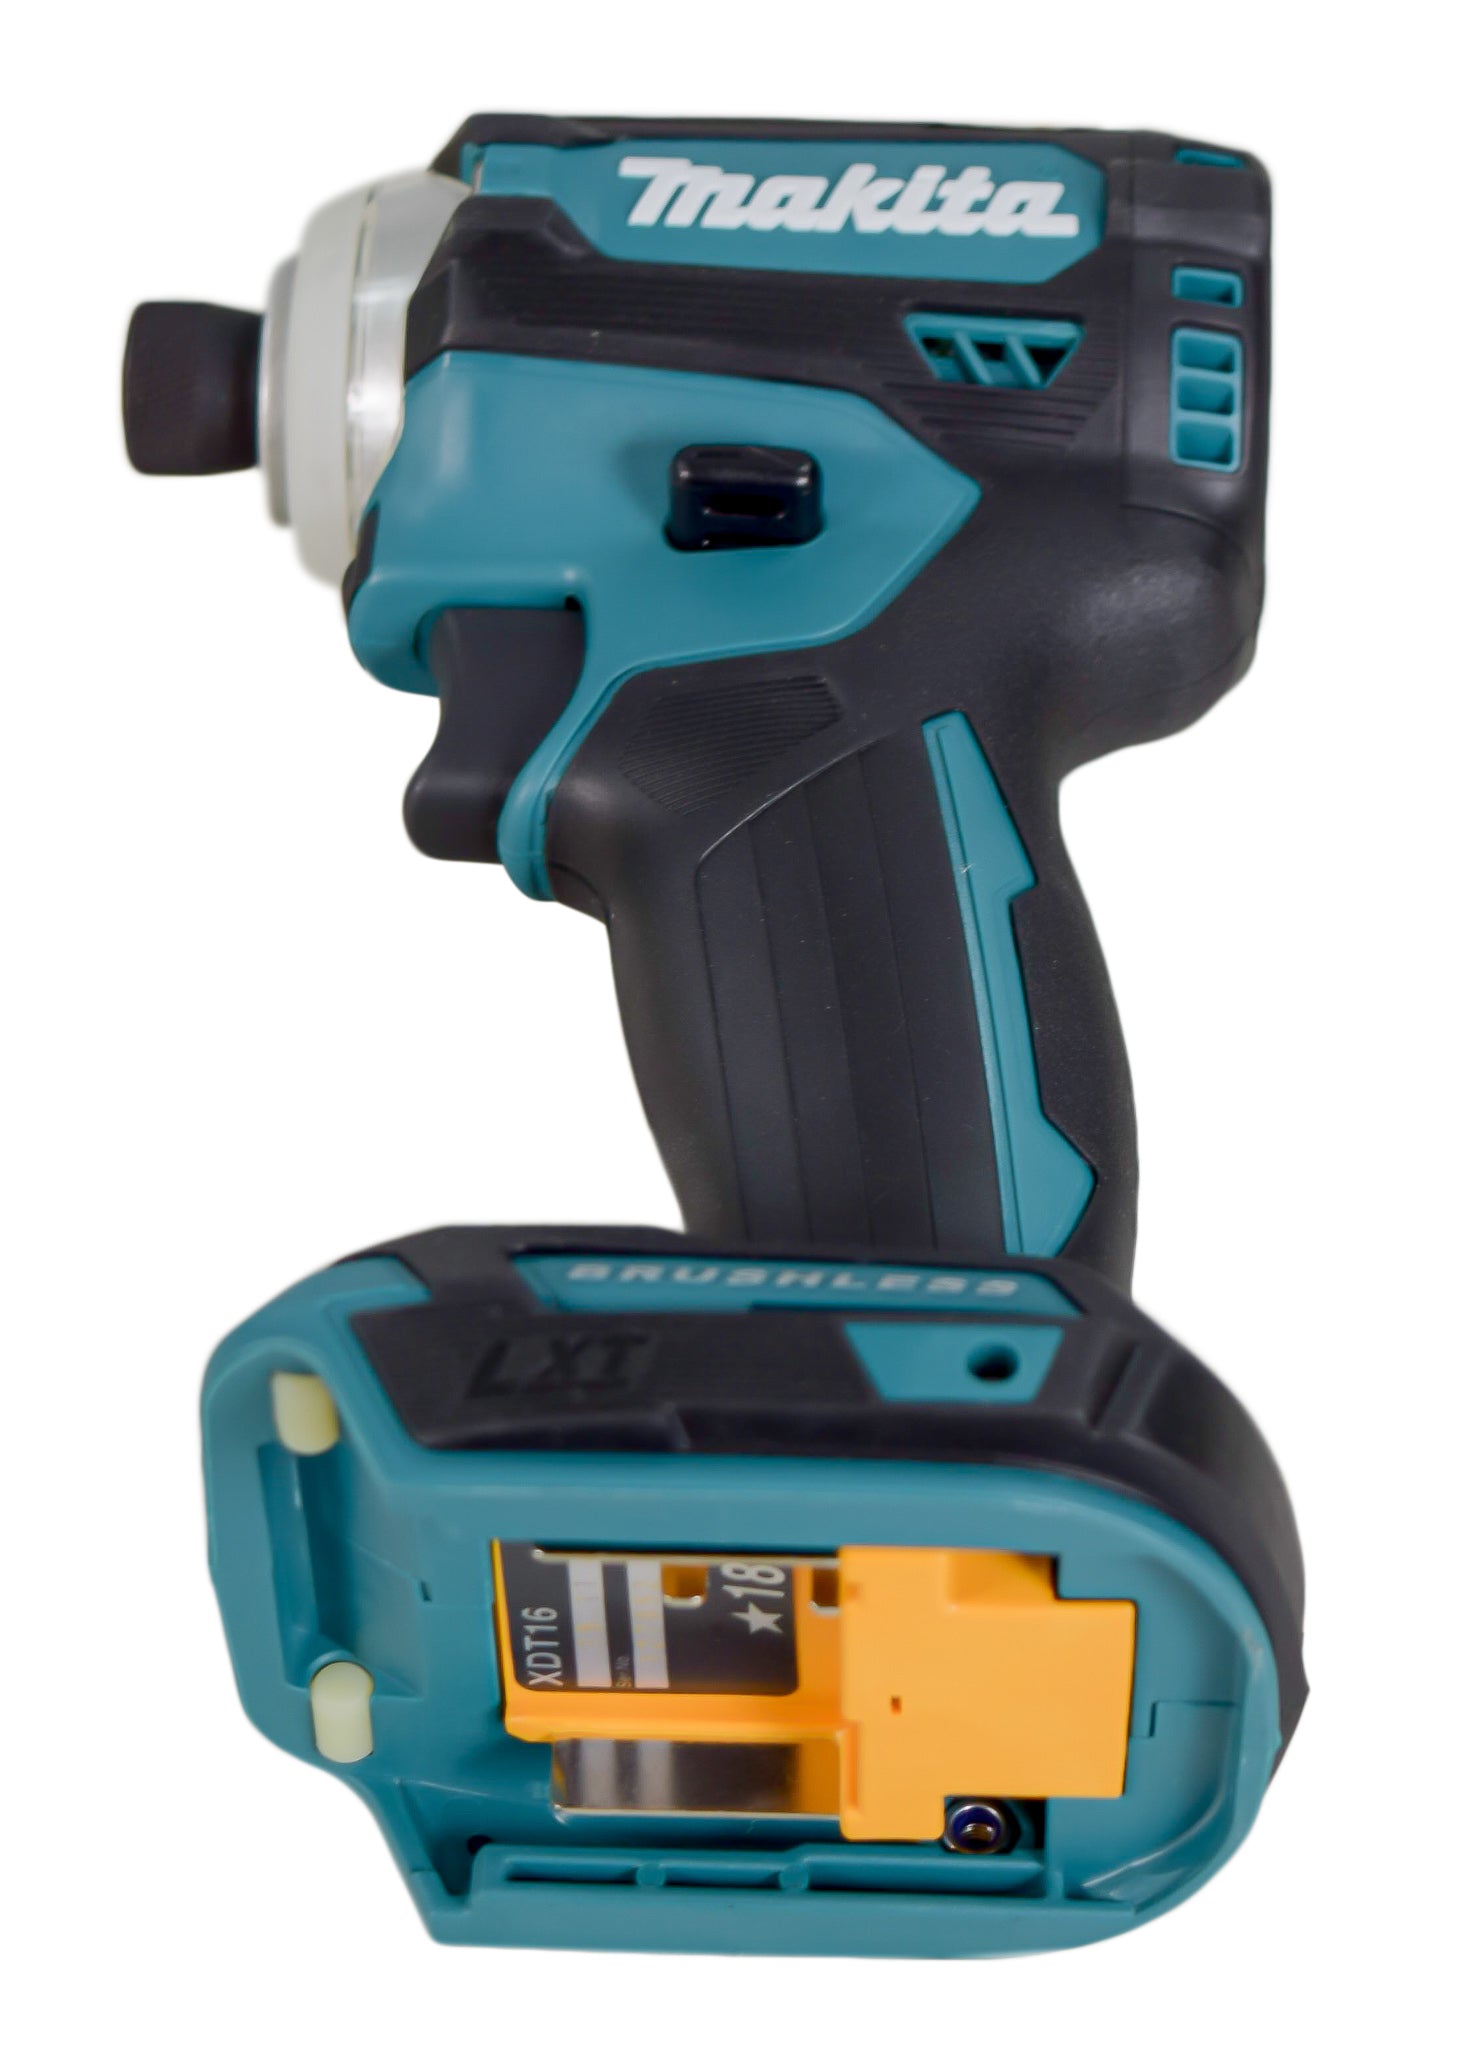 Makita XDT16Z 18V LXT Lithium-Ion Brushless Cordless Quick-Shift Mode 4-Speed Impact Driver, Tool Only (CLONE)